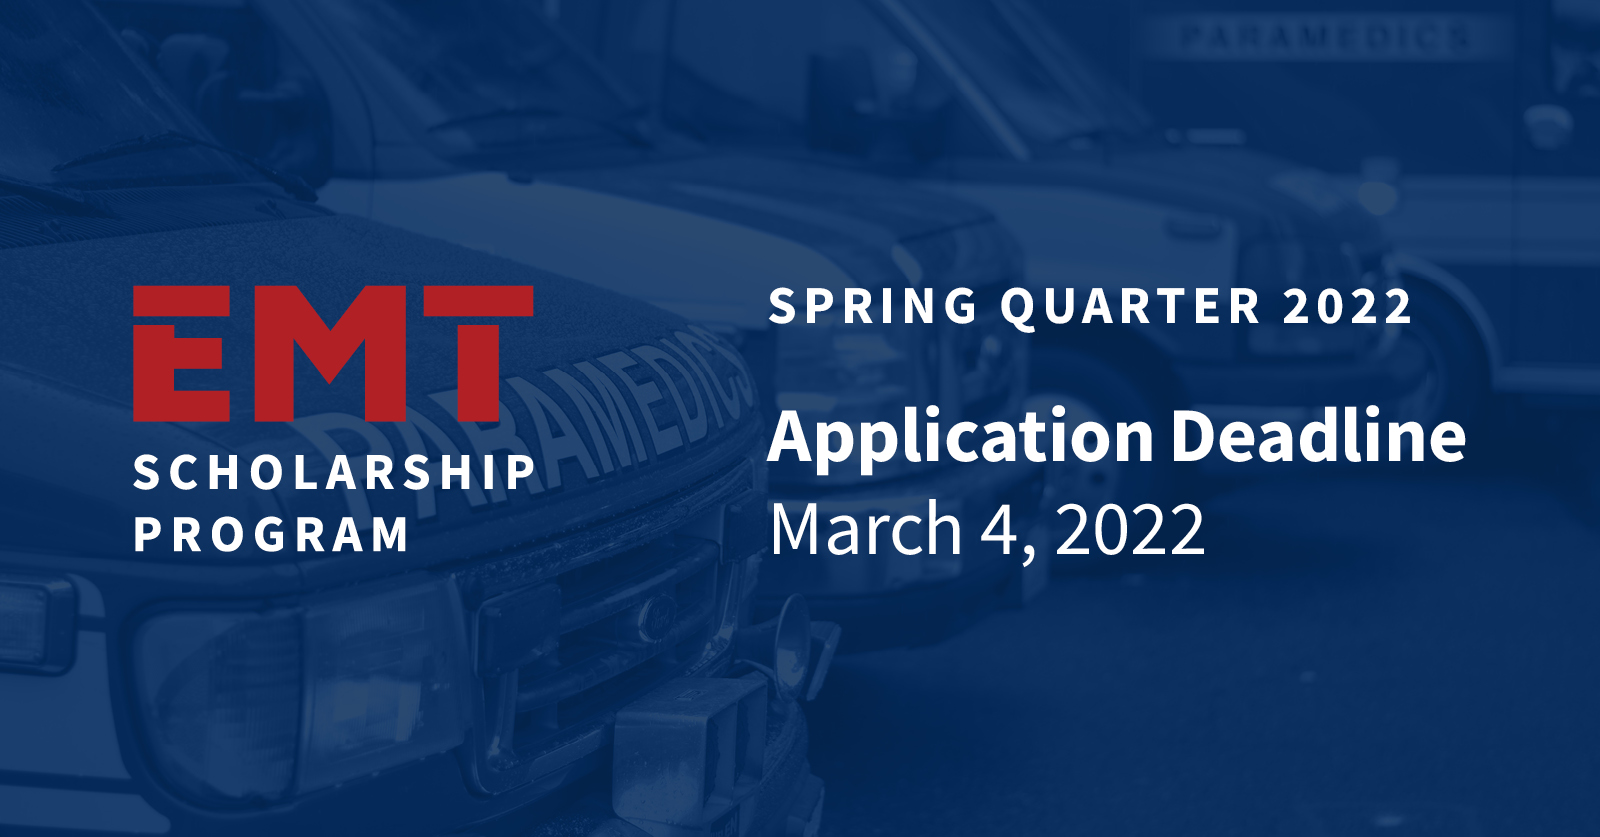 Medic One Foundation on Twitter "The EMT Scholarship application